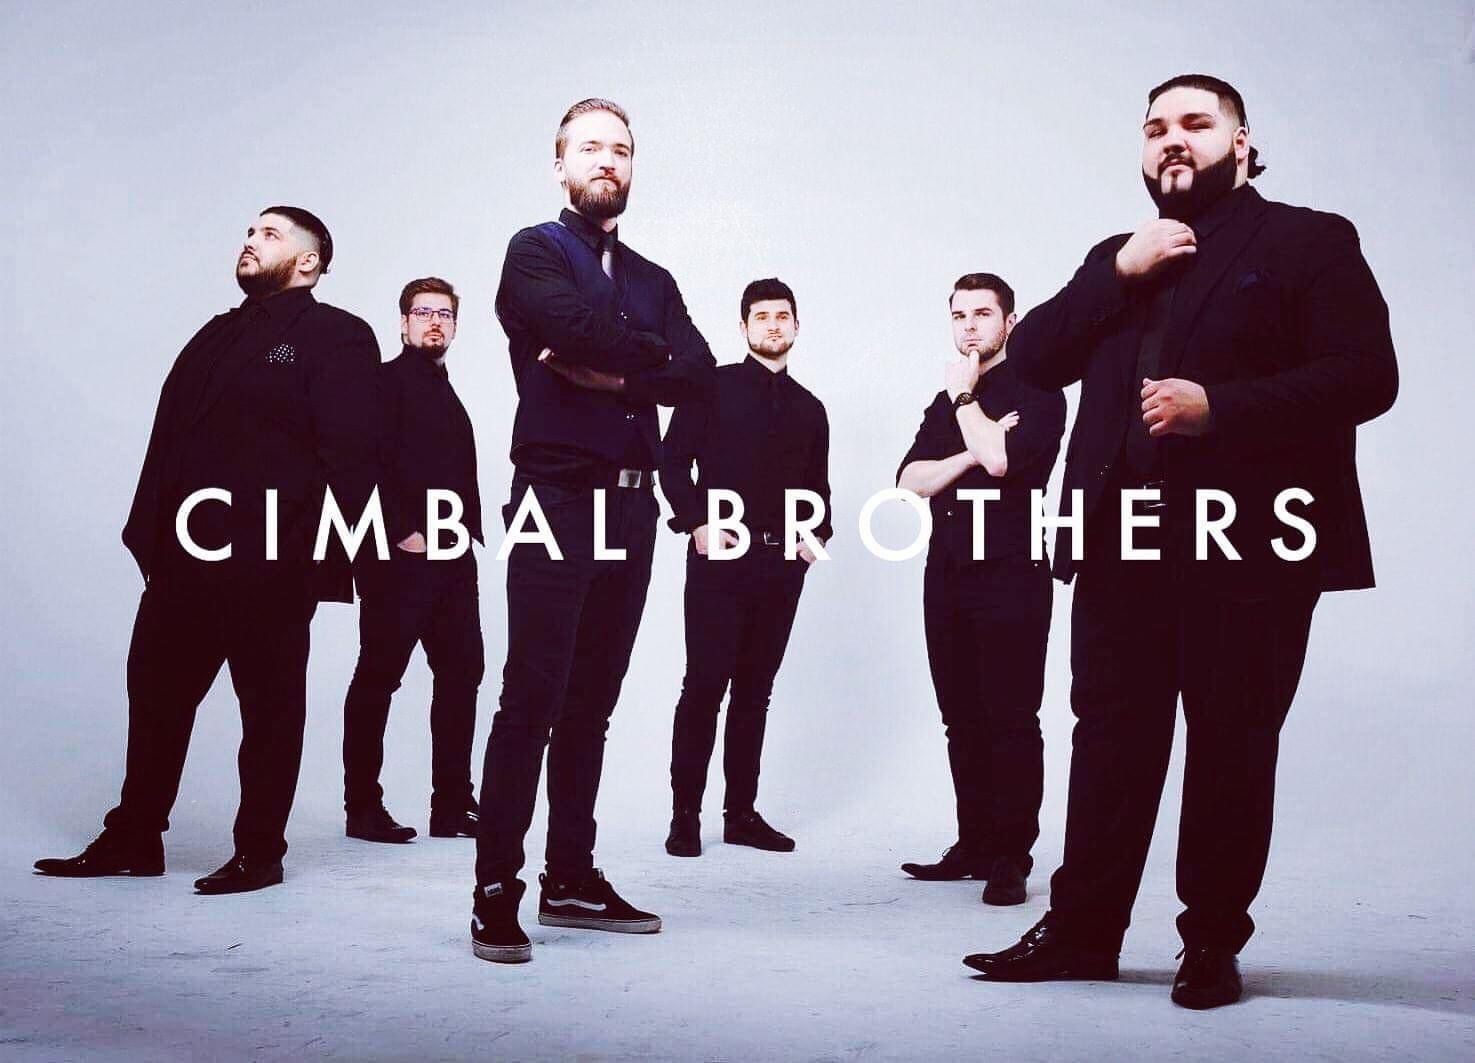 Cimbal brothers